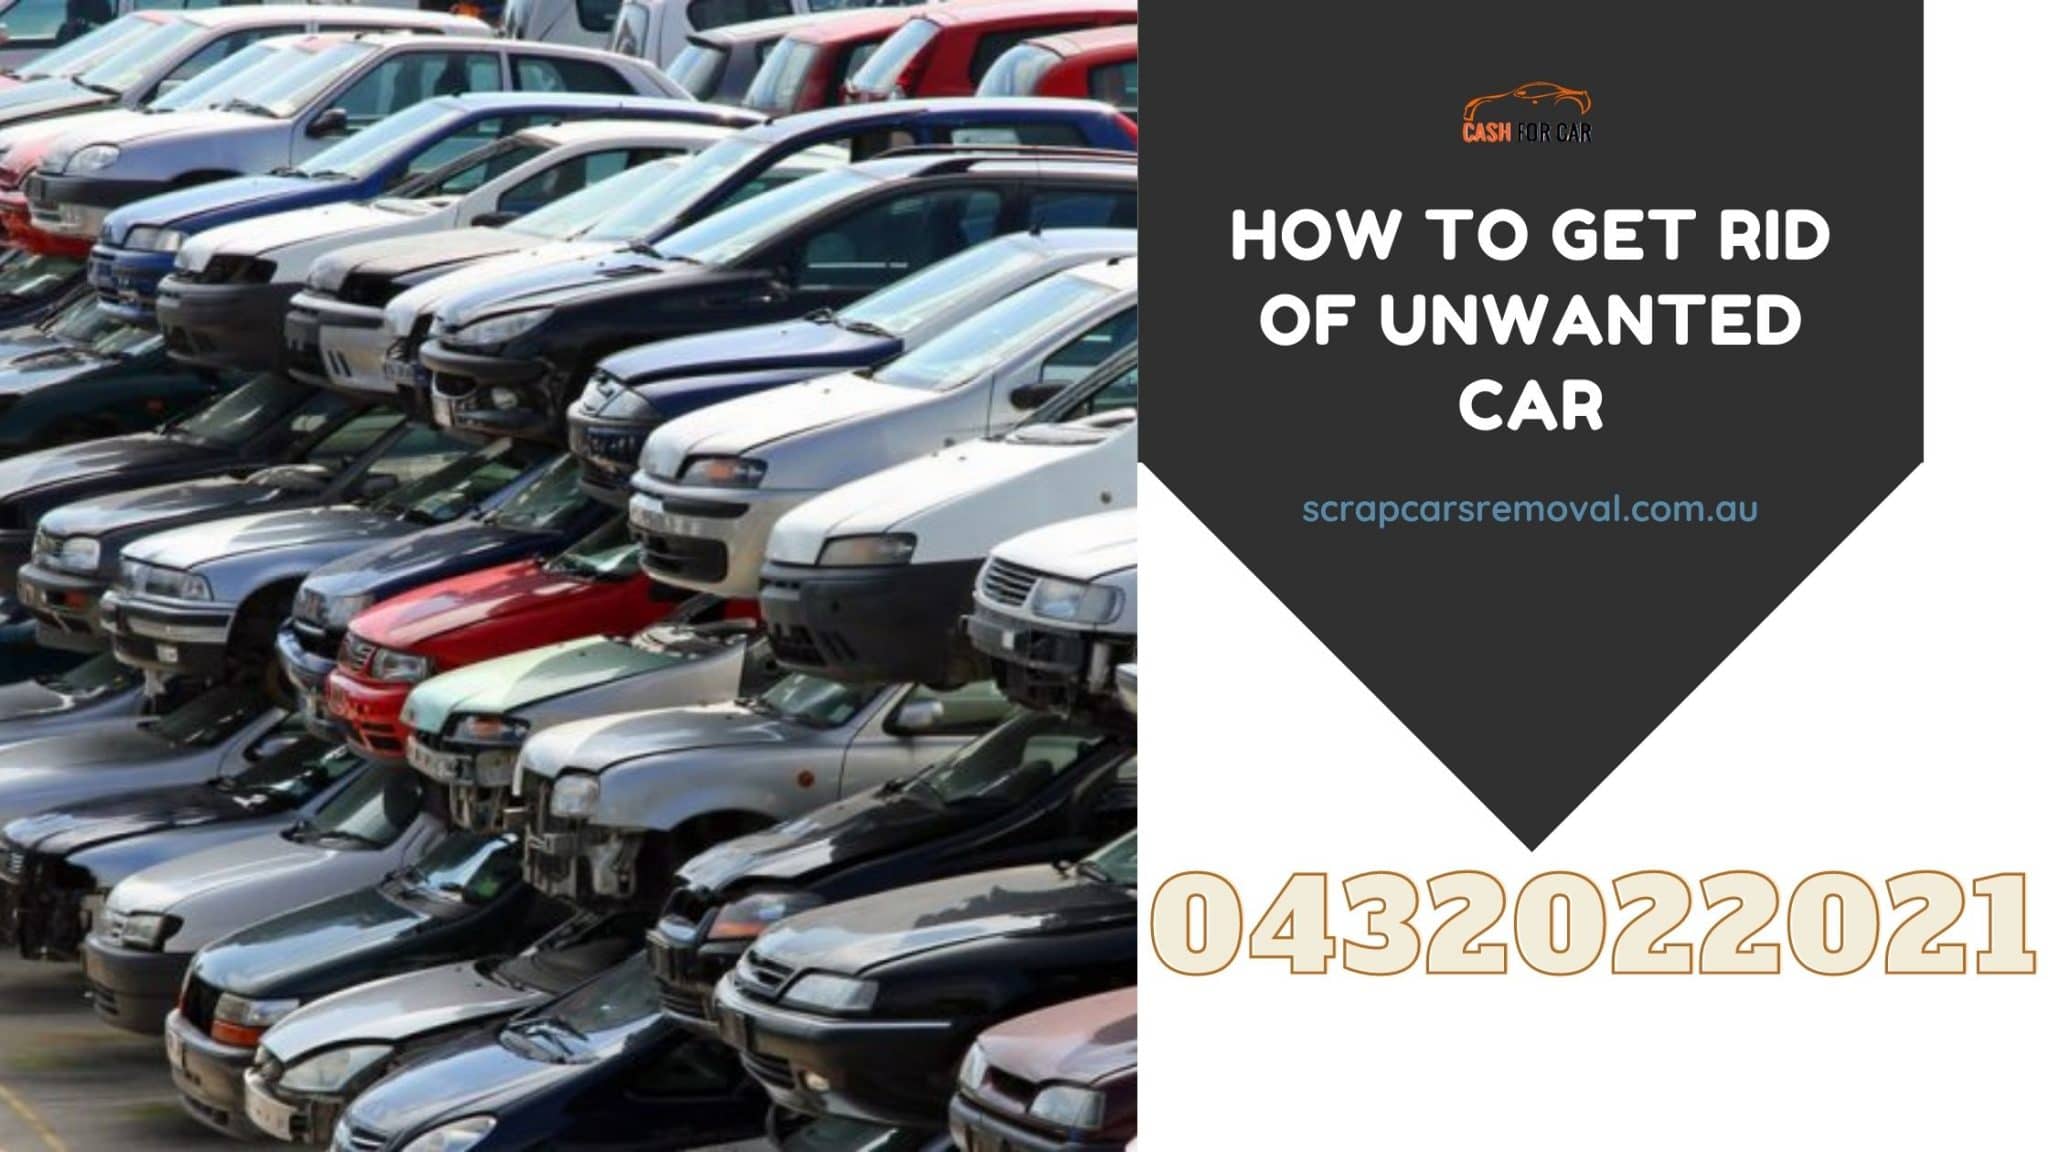 Get Rid of Unwanted Car